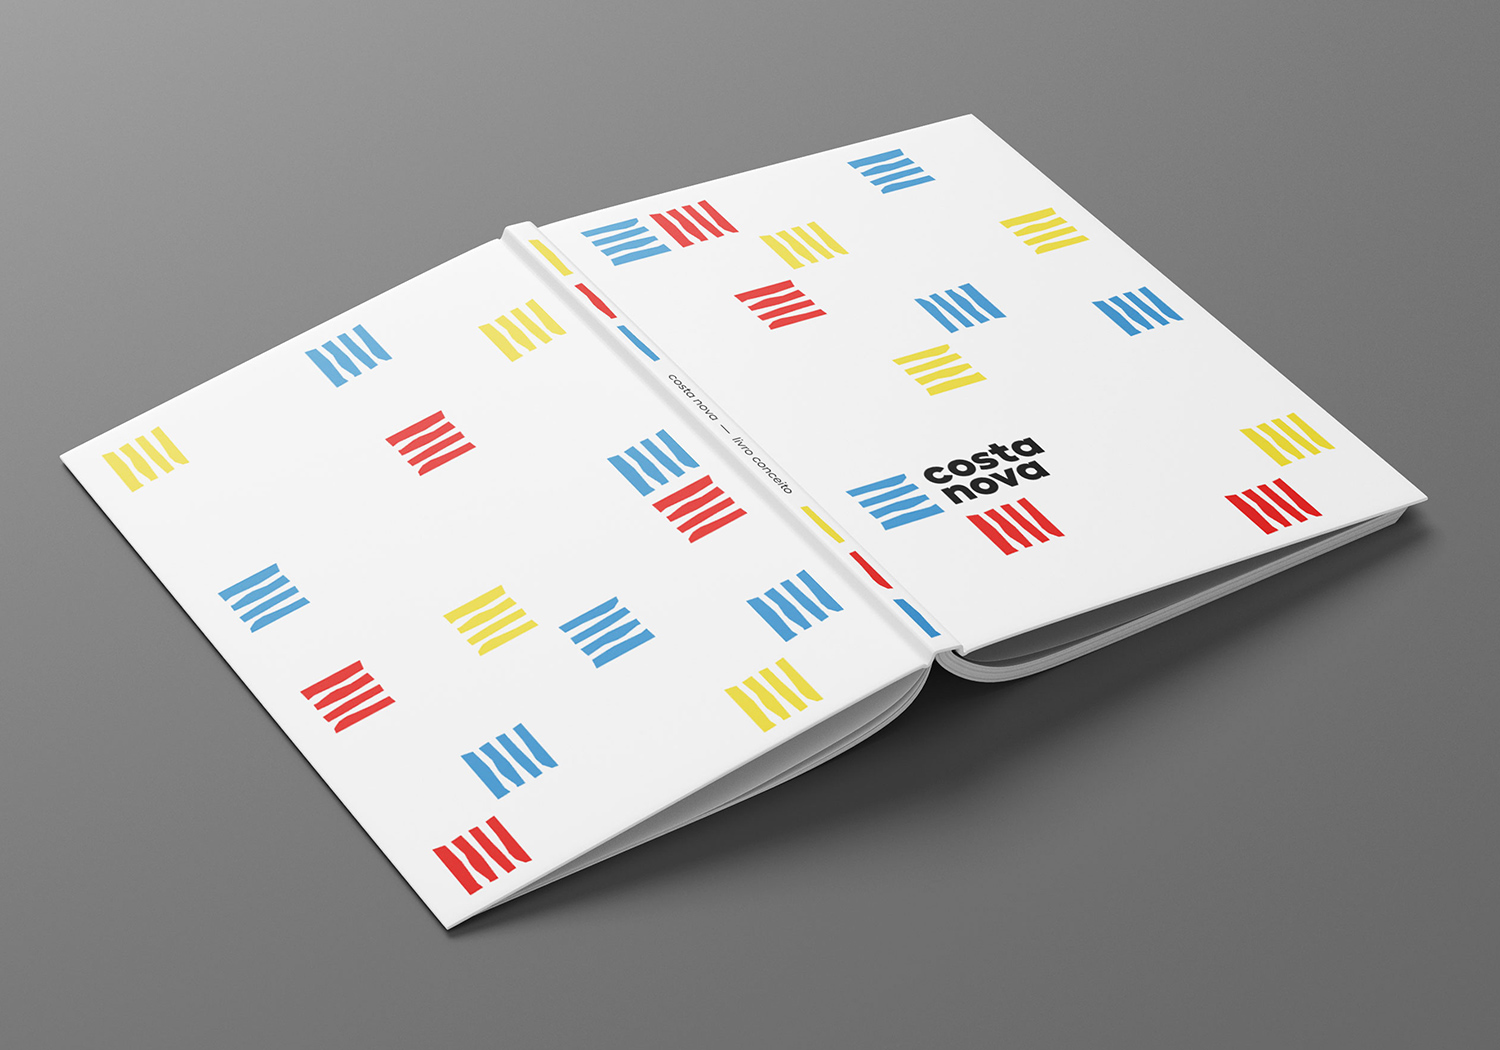 Back book cover with colorful elements of the logo.